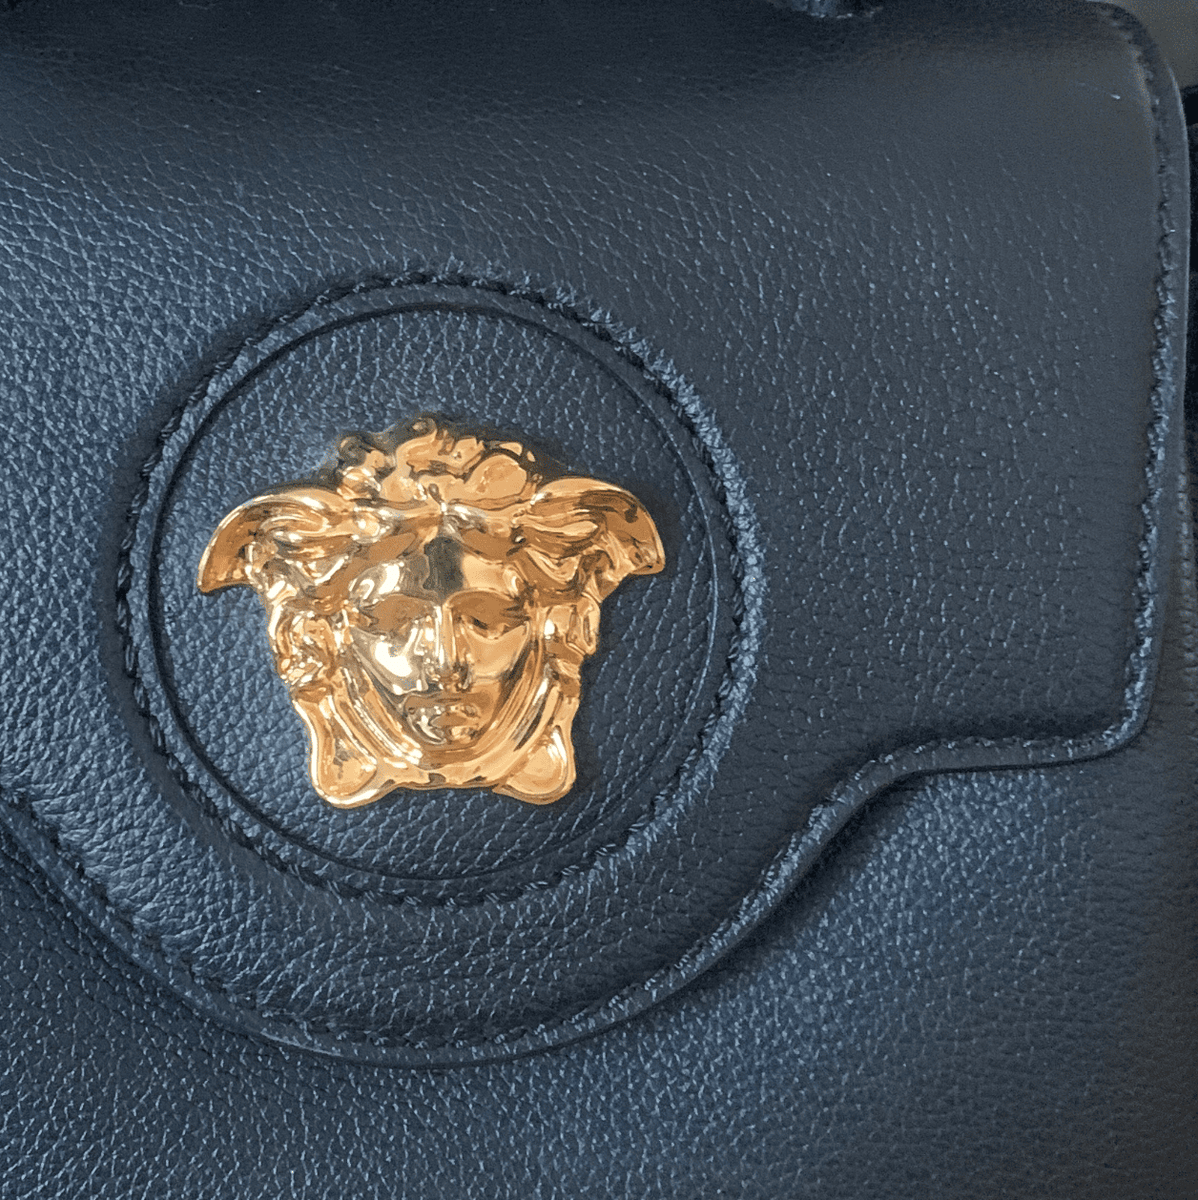 How to Know if a Versace Bag Is Real: 3 Best Signs